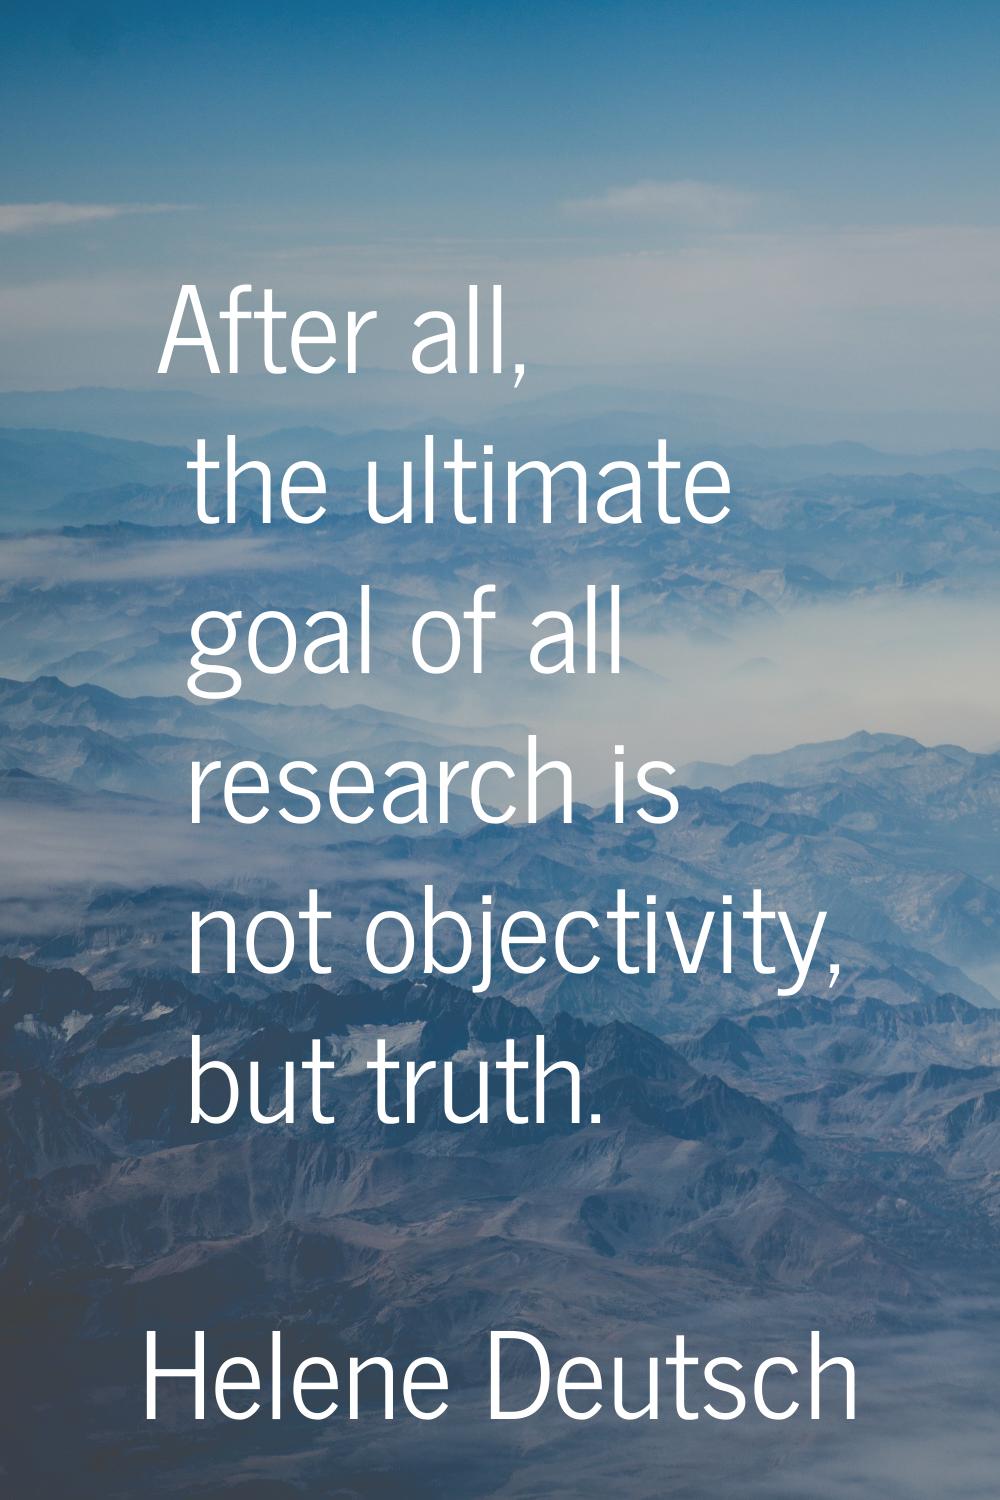 After all, the ultimate goal of all research is not objectivity, but truth.